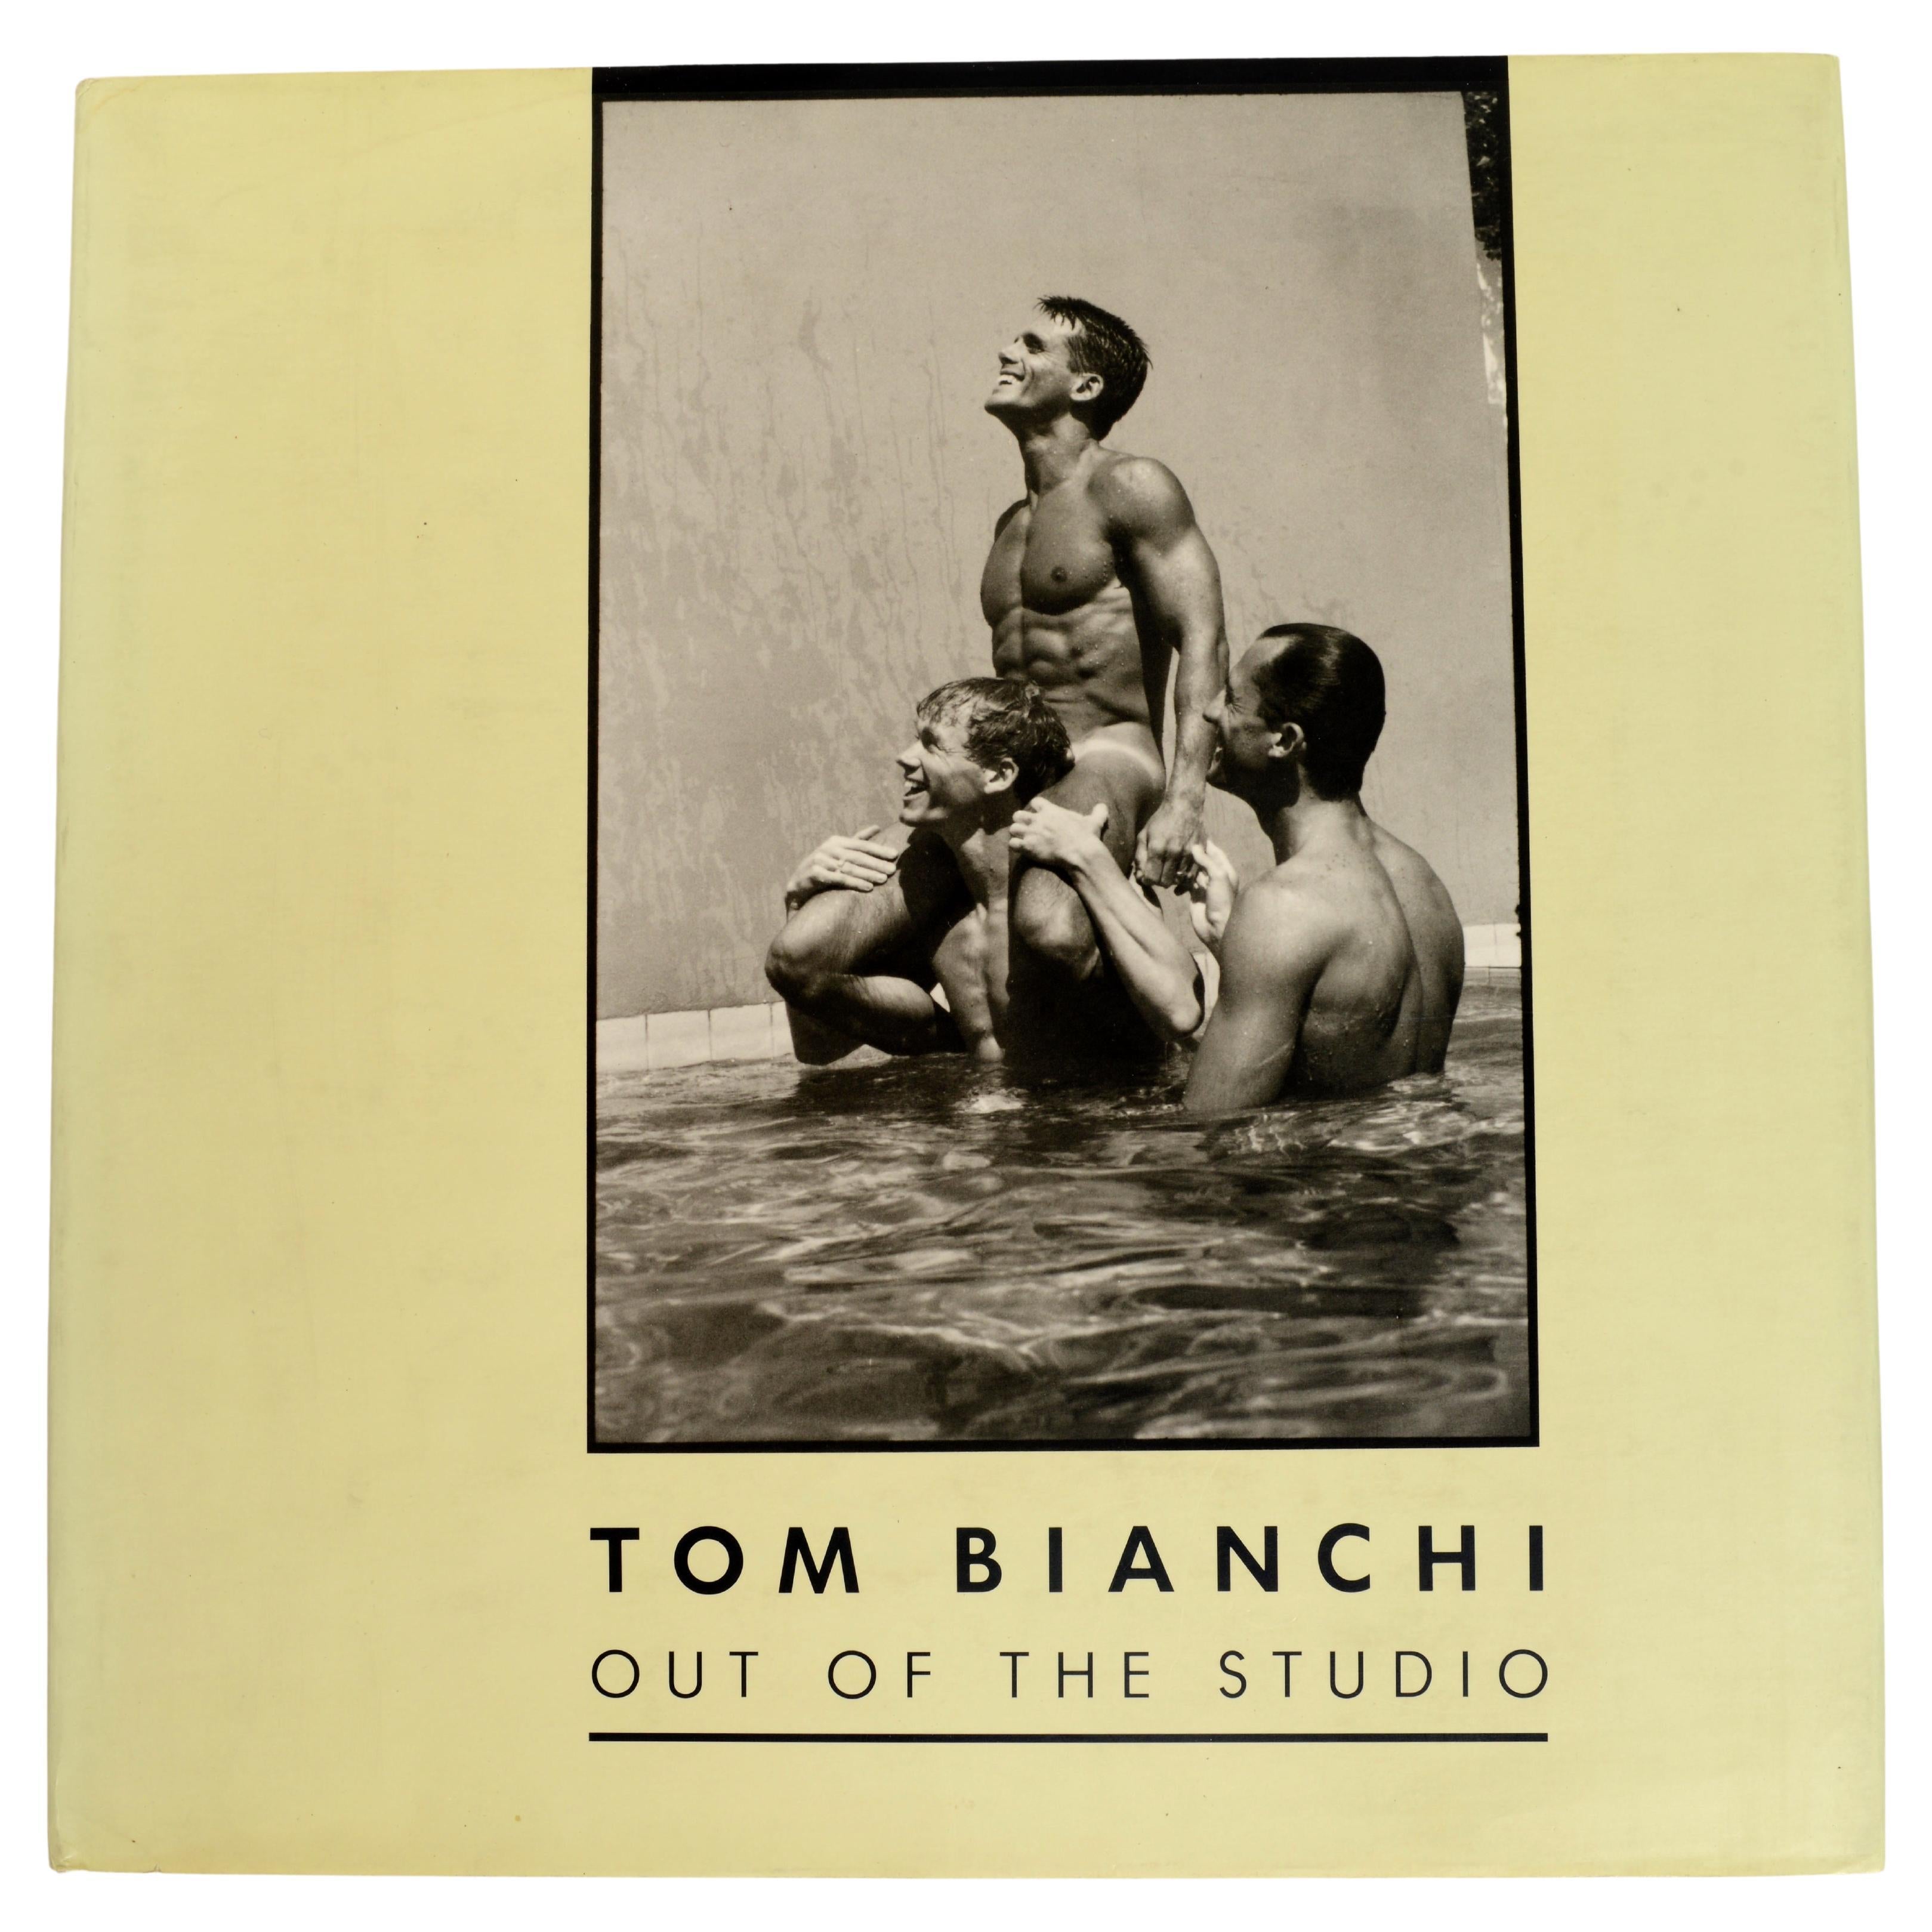 Out of the Studio de Tom Bianchi, Stated 1st Ed en vente